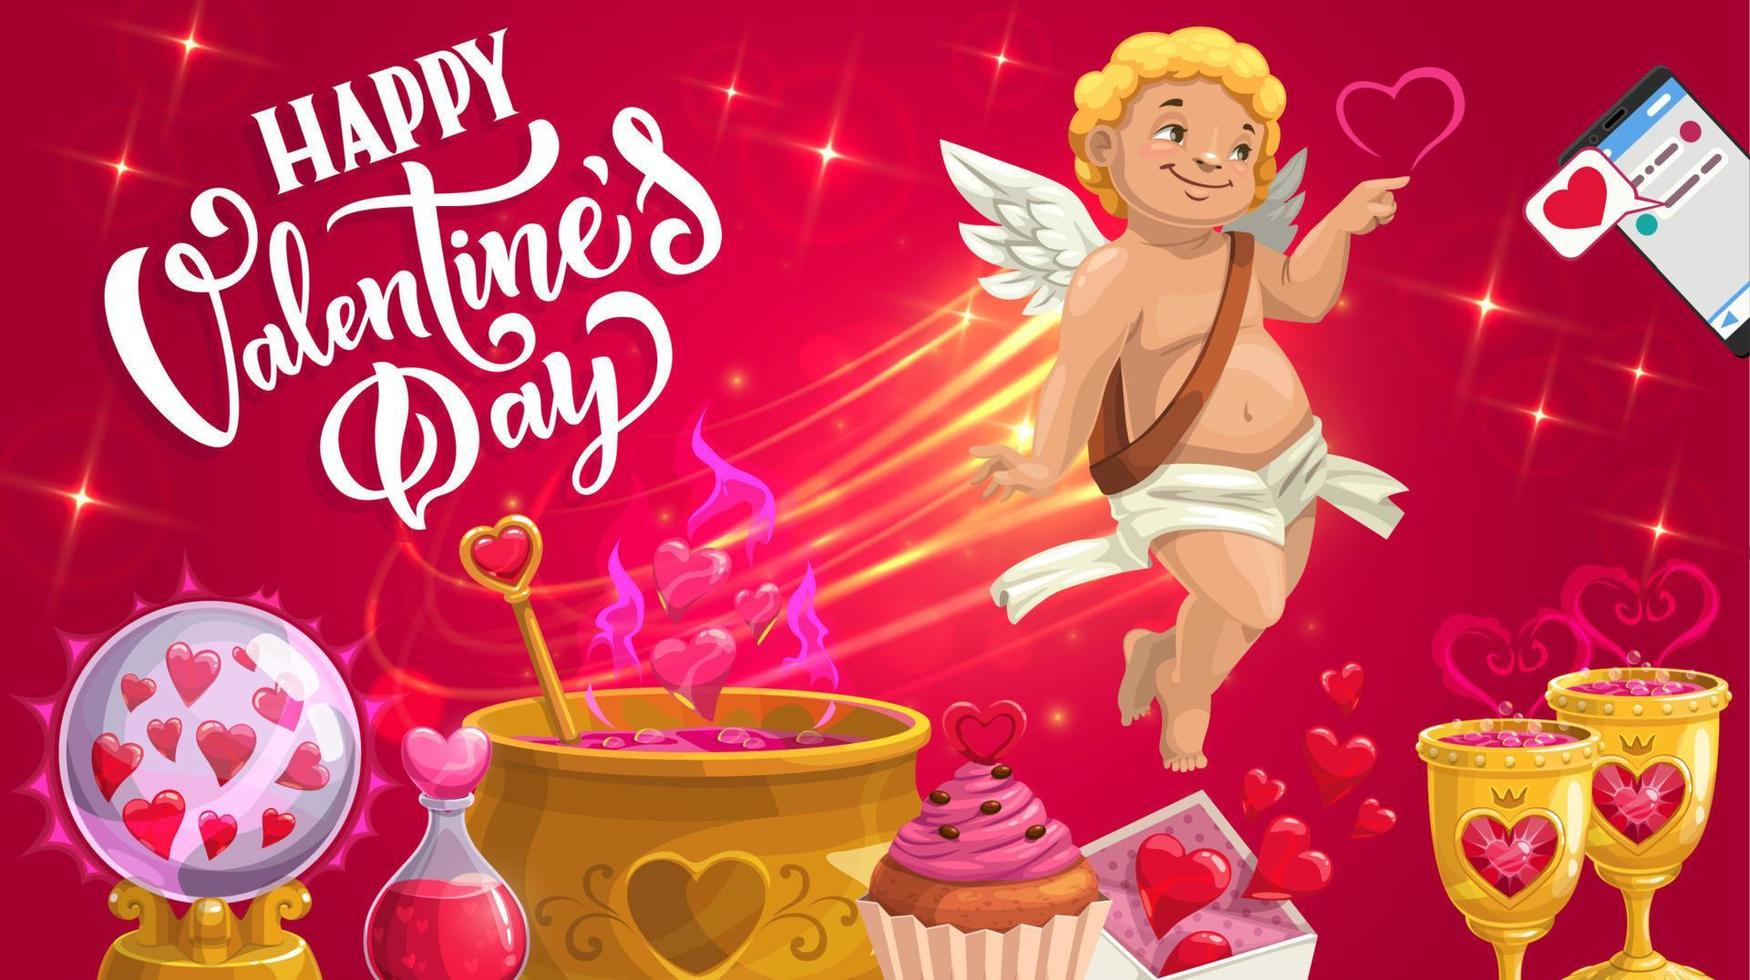 Cupid with love potion, red hearts, chocolate cake vector